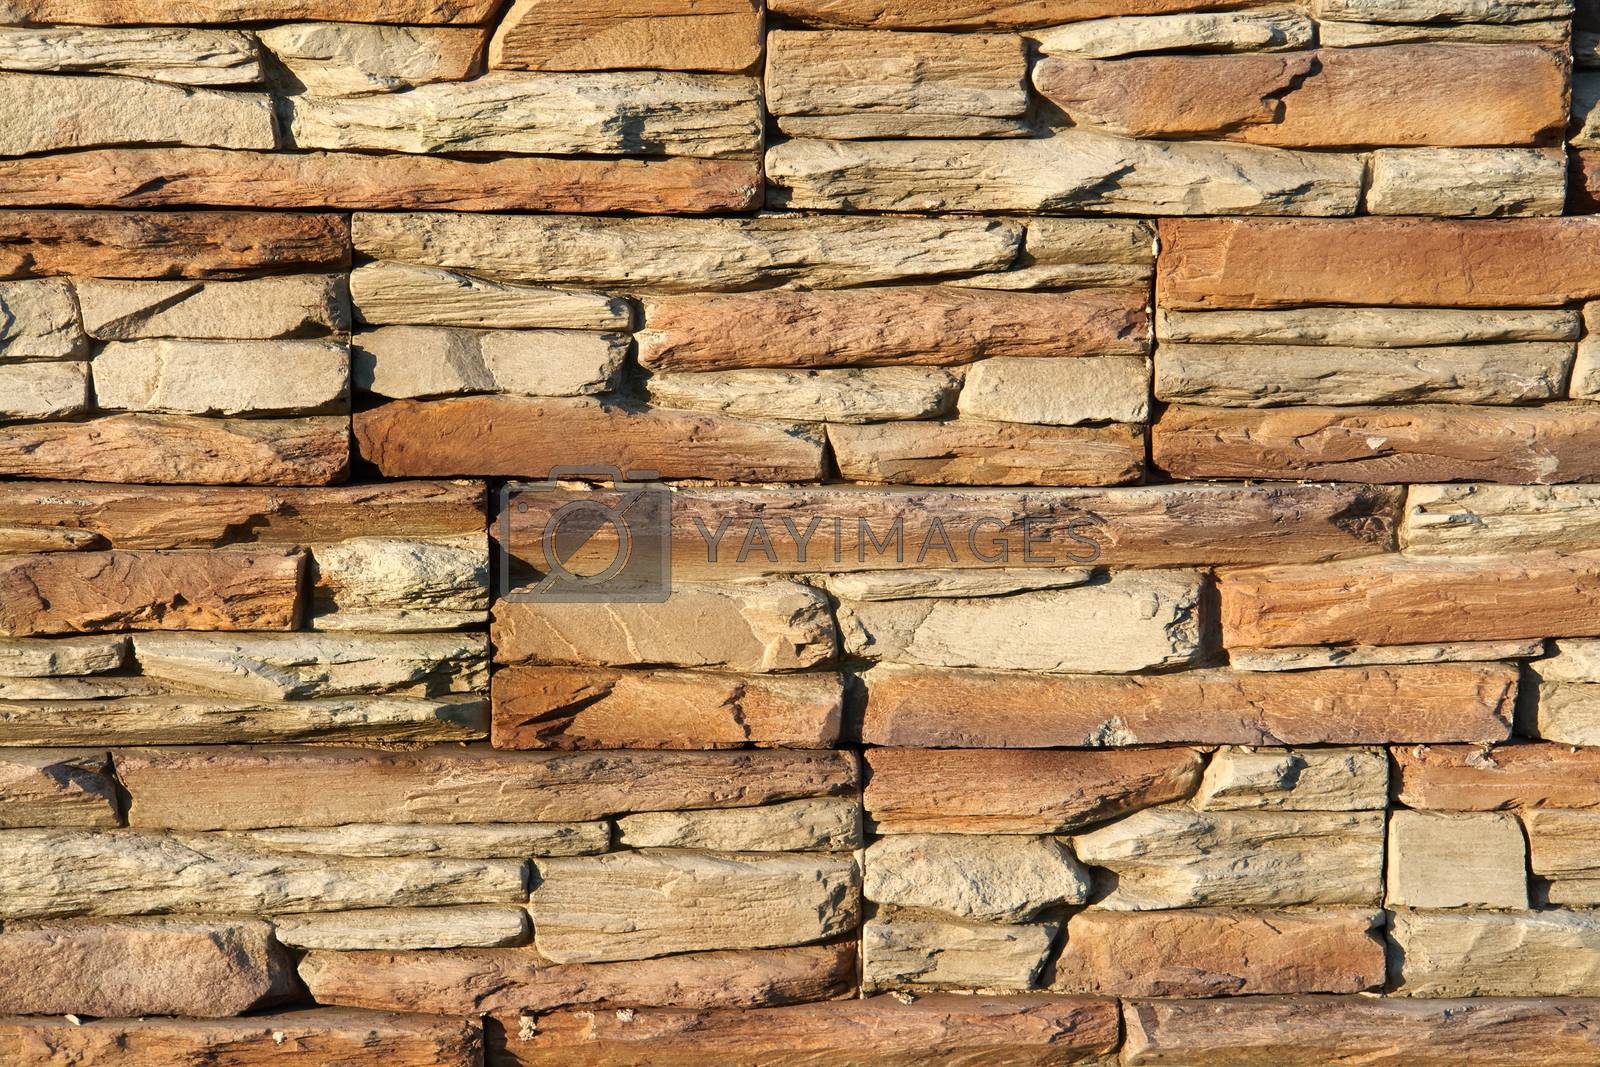 Royalty free image of Stone stucco wall by Ronyzmbow